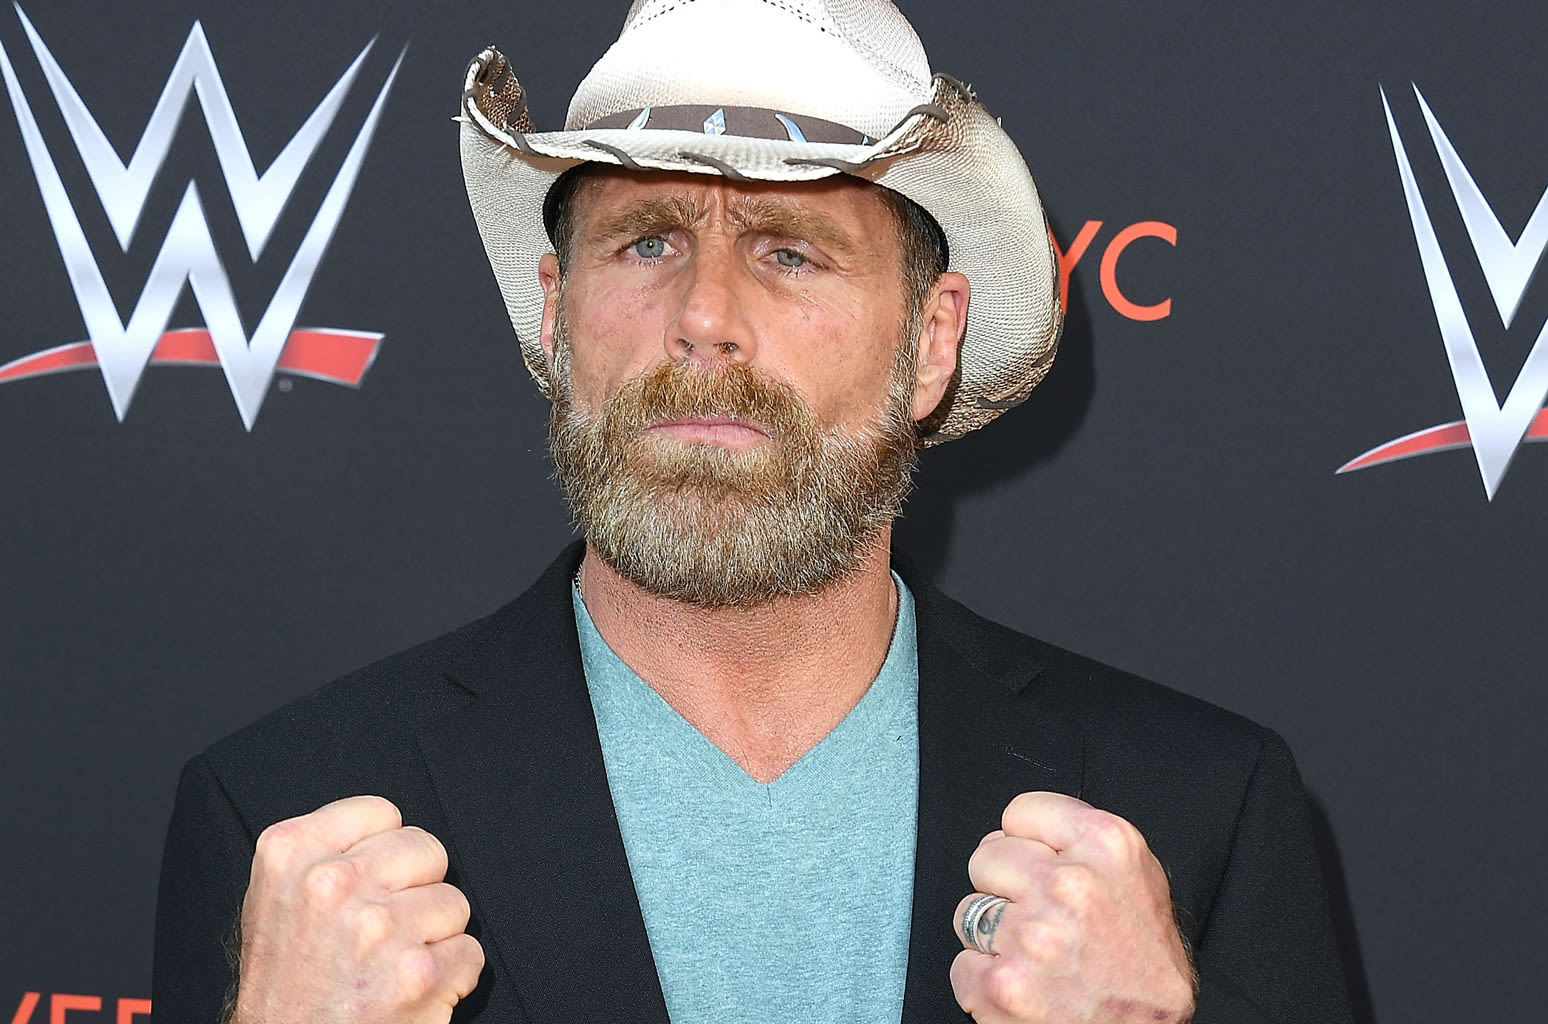 Shawn Michaels Invites Kendrick Lamar & Drake on ‘WWE NXT’ to ‘Settle This Thing’